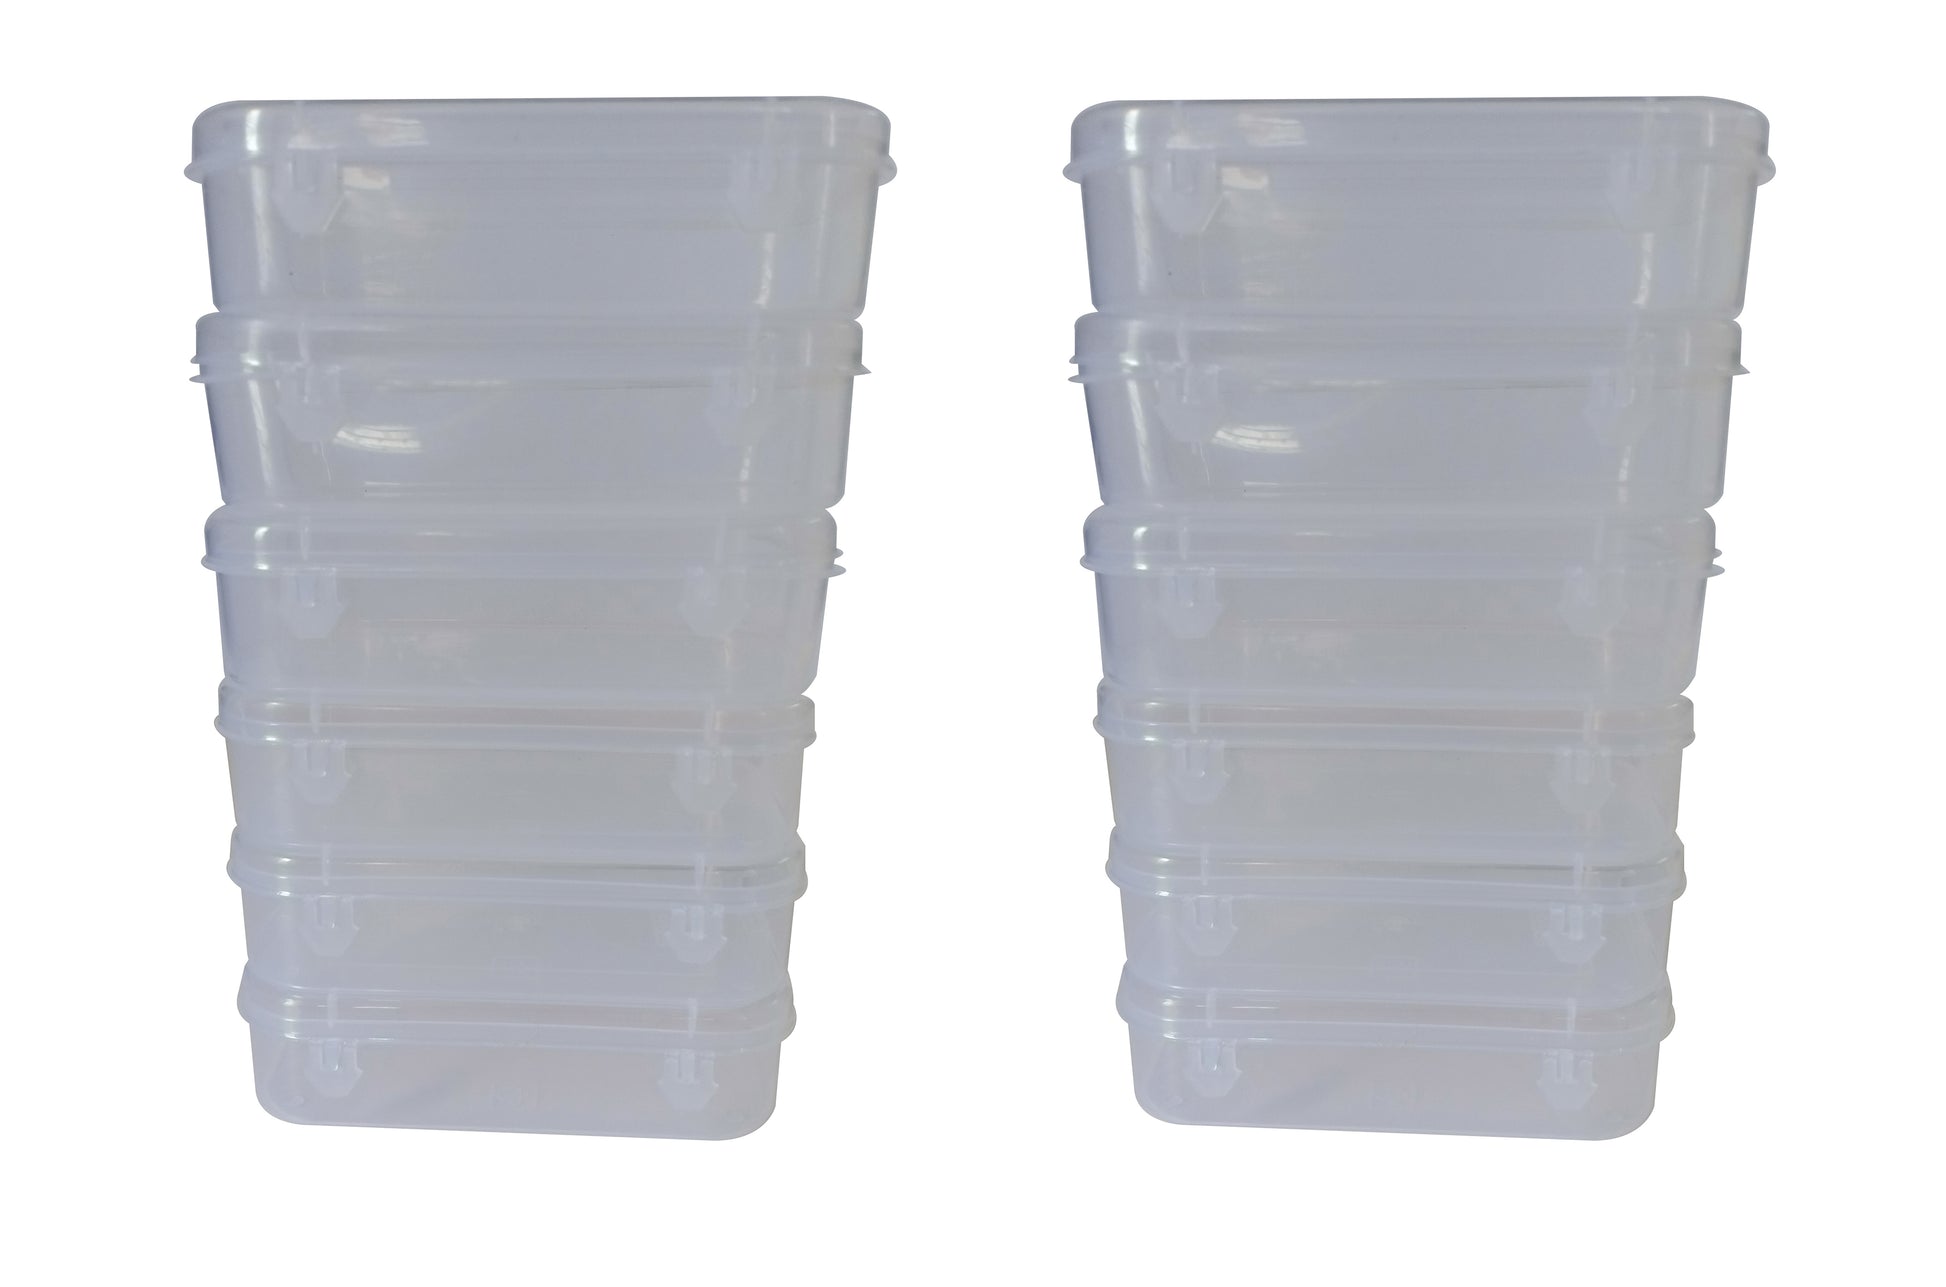 Clear Plastic Very Small Storage Boxes Size 3.5x1.5x1 Inches (Set of 12)